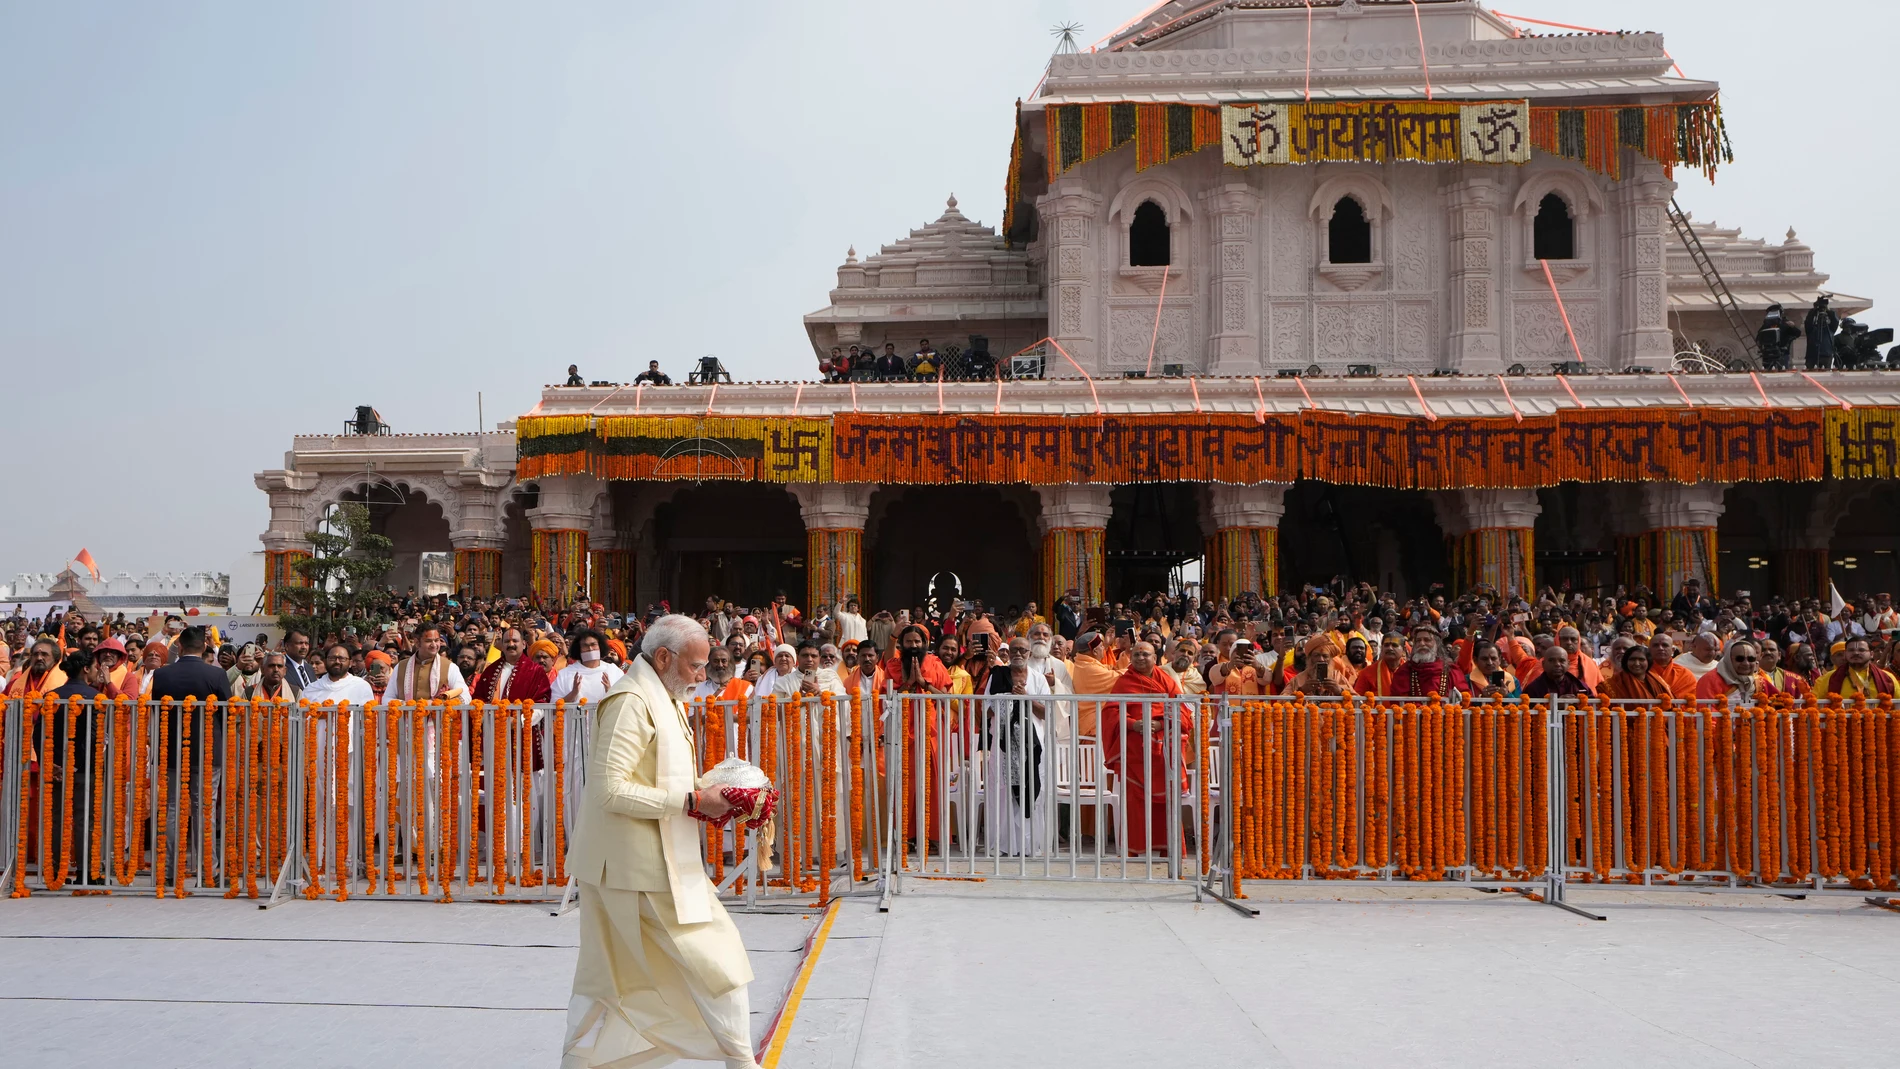 Indian Prime Minister Narendra Modi, arrives to lead the opening of a temple dedicated to Hinduism’s Lord Ram in Ayodhya, India, Monday, Jan. 22, 2024. The magnificent temple lies at the site of a 16th-century mosque that was destroyed by a Hindu mob in December 1992, sparking massive Hindu-Muslim violence. (AP Photo/Rajesh Kumar Singh)